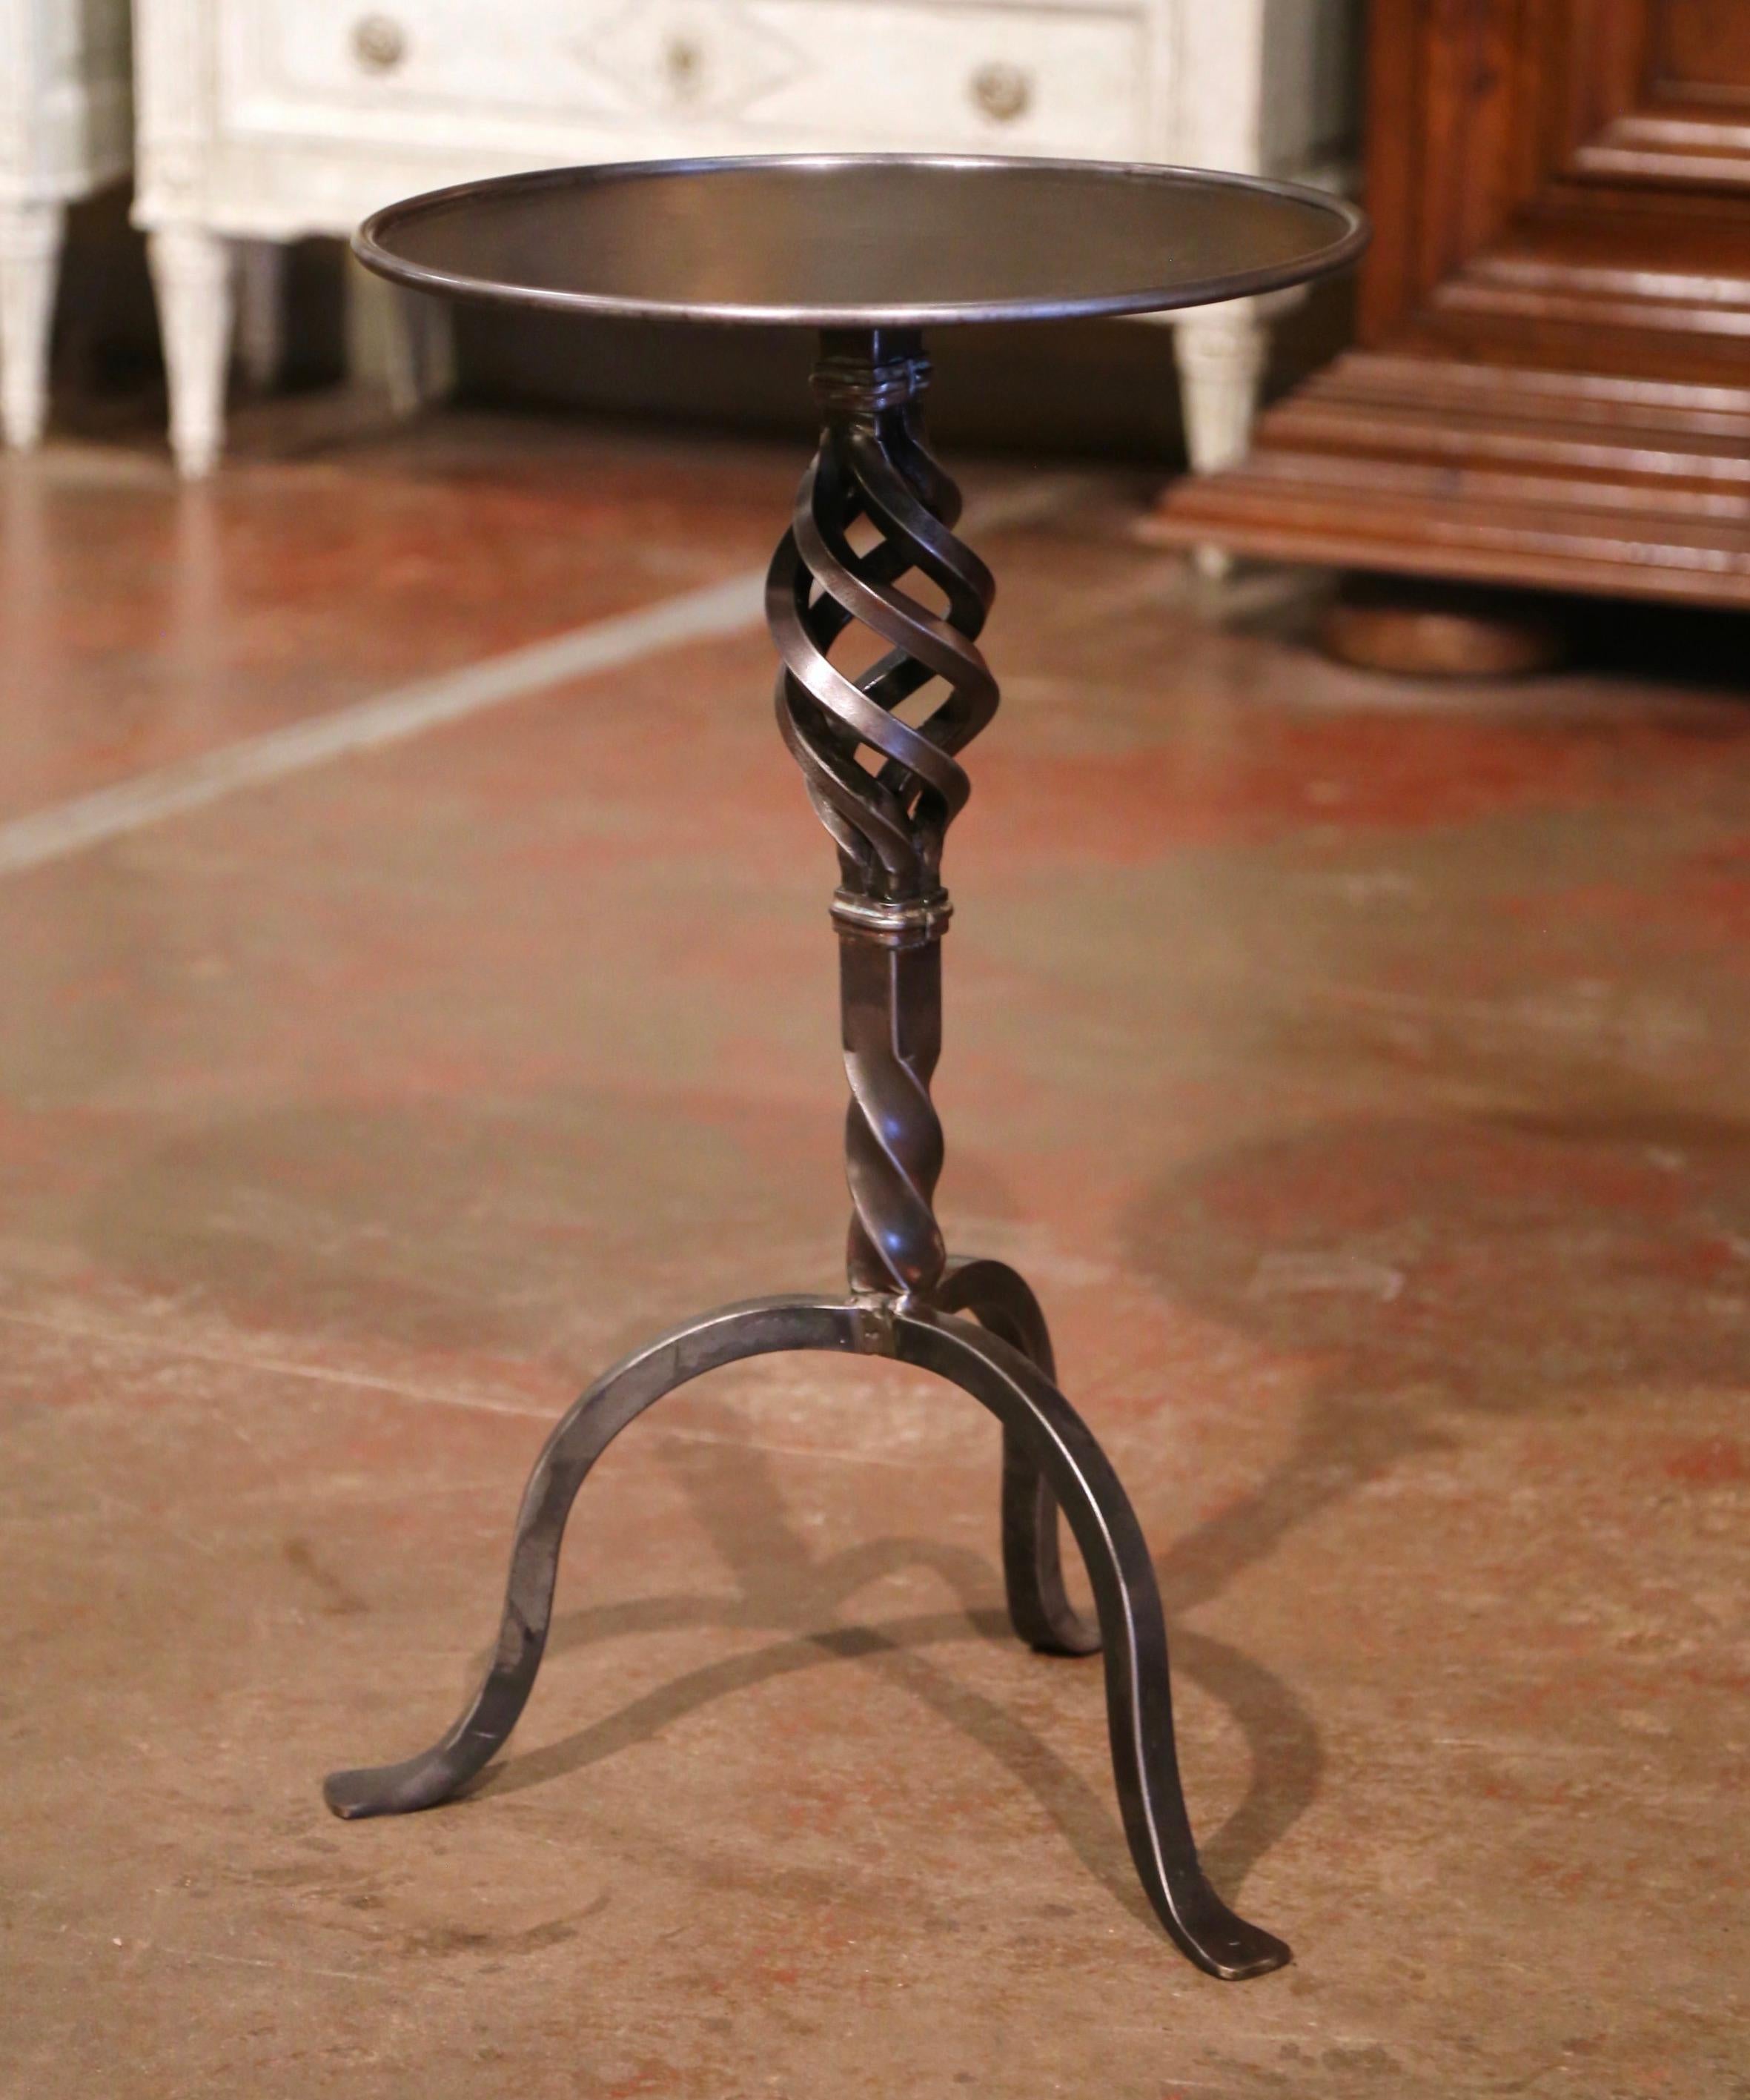 This elegant, antique Gothic pedestal table was crafted in Southern France, circa 1920. The intricate martini table features a forged central pedestal stem embellished with a spun knob over turned decor, with three curved legs ending with flat feet.